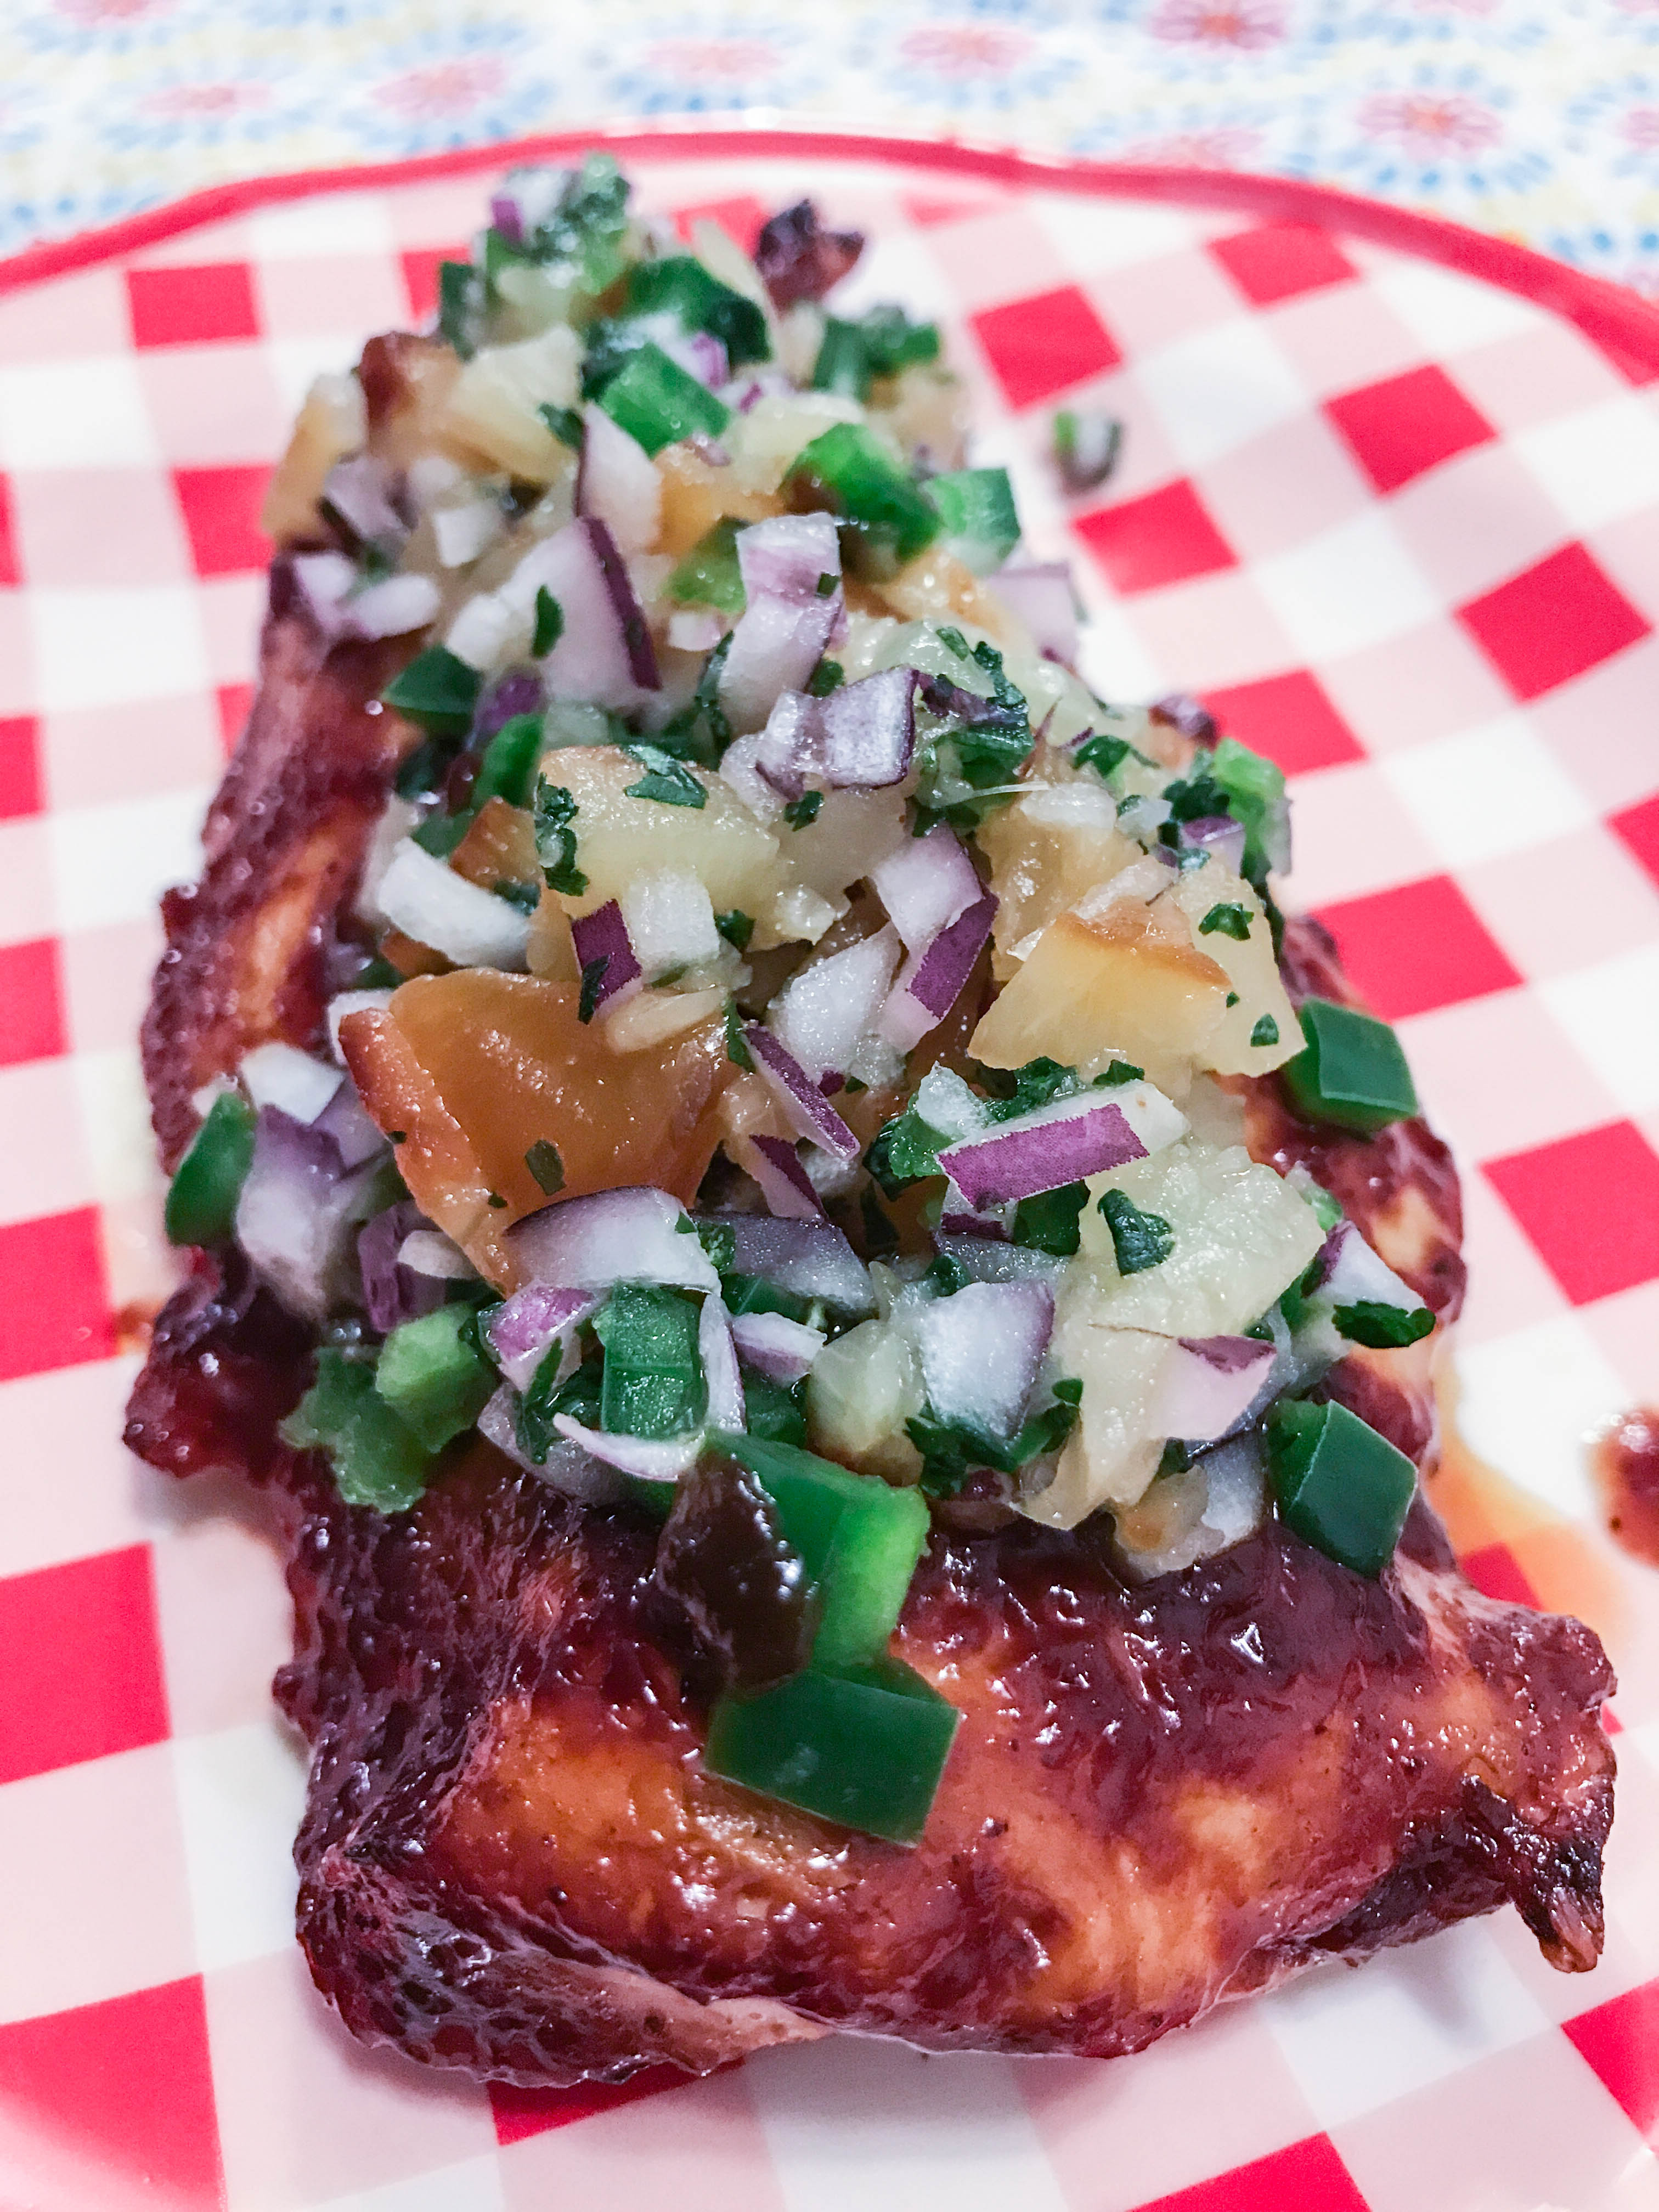 Honey Jalapeño Mesquite Chicken Breasts with Grilled Pineapple Salsa!